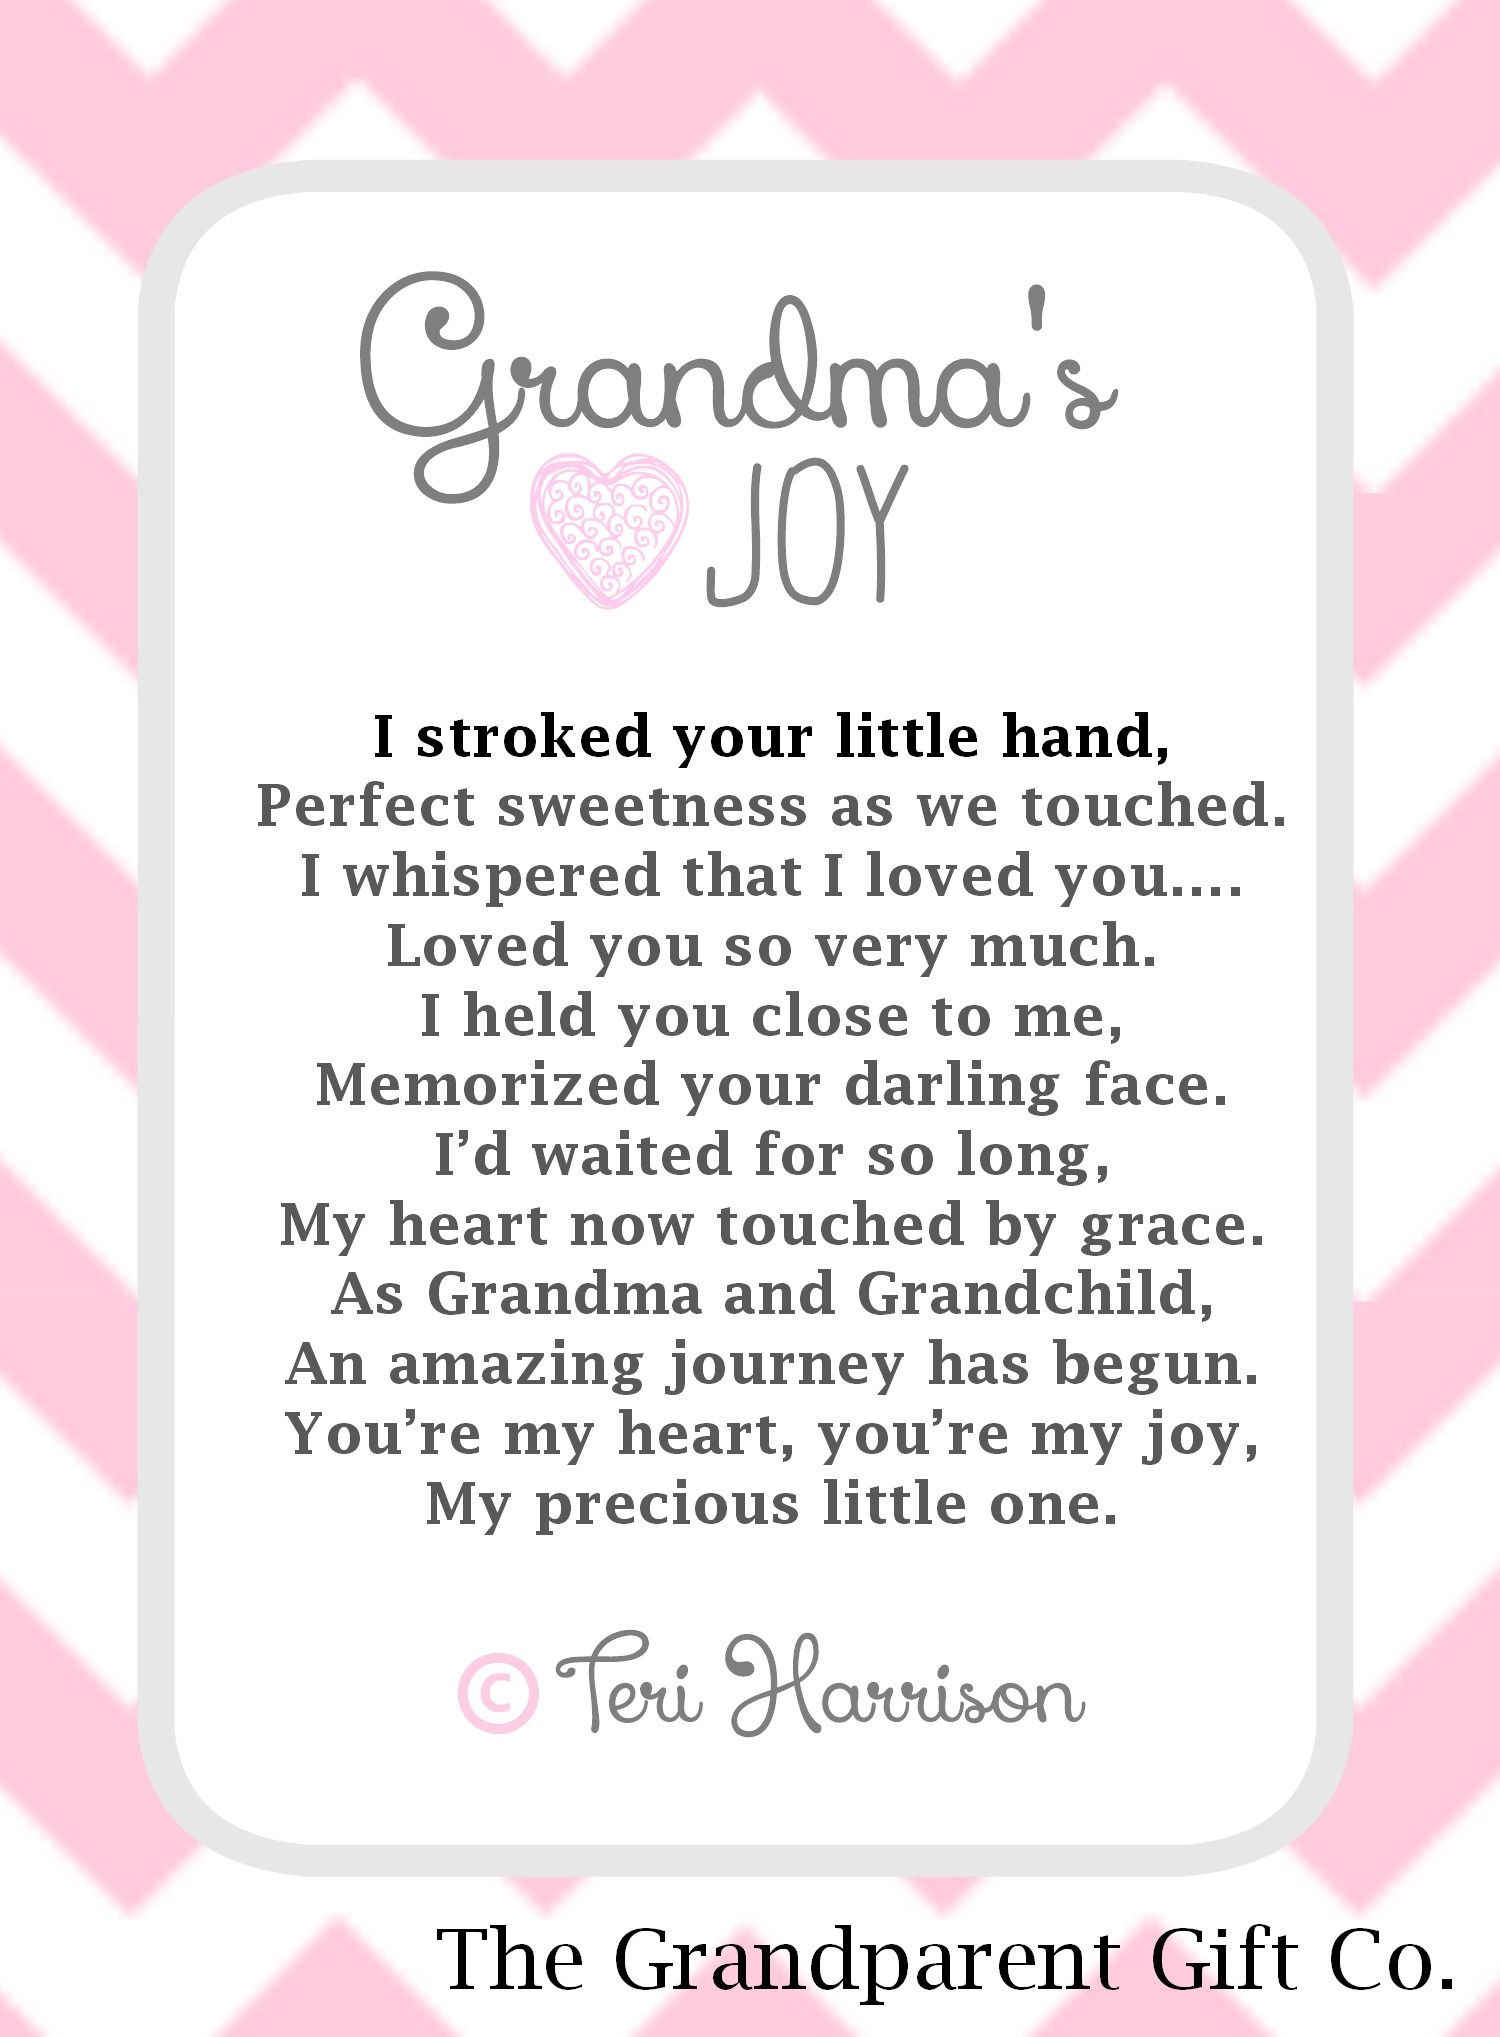 Grandmother And Granddaughter Quotes
 Grandma s Joy The Grandparent Gift Co creates